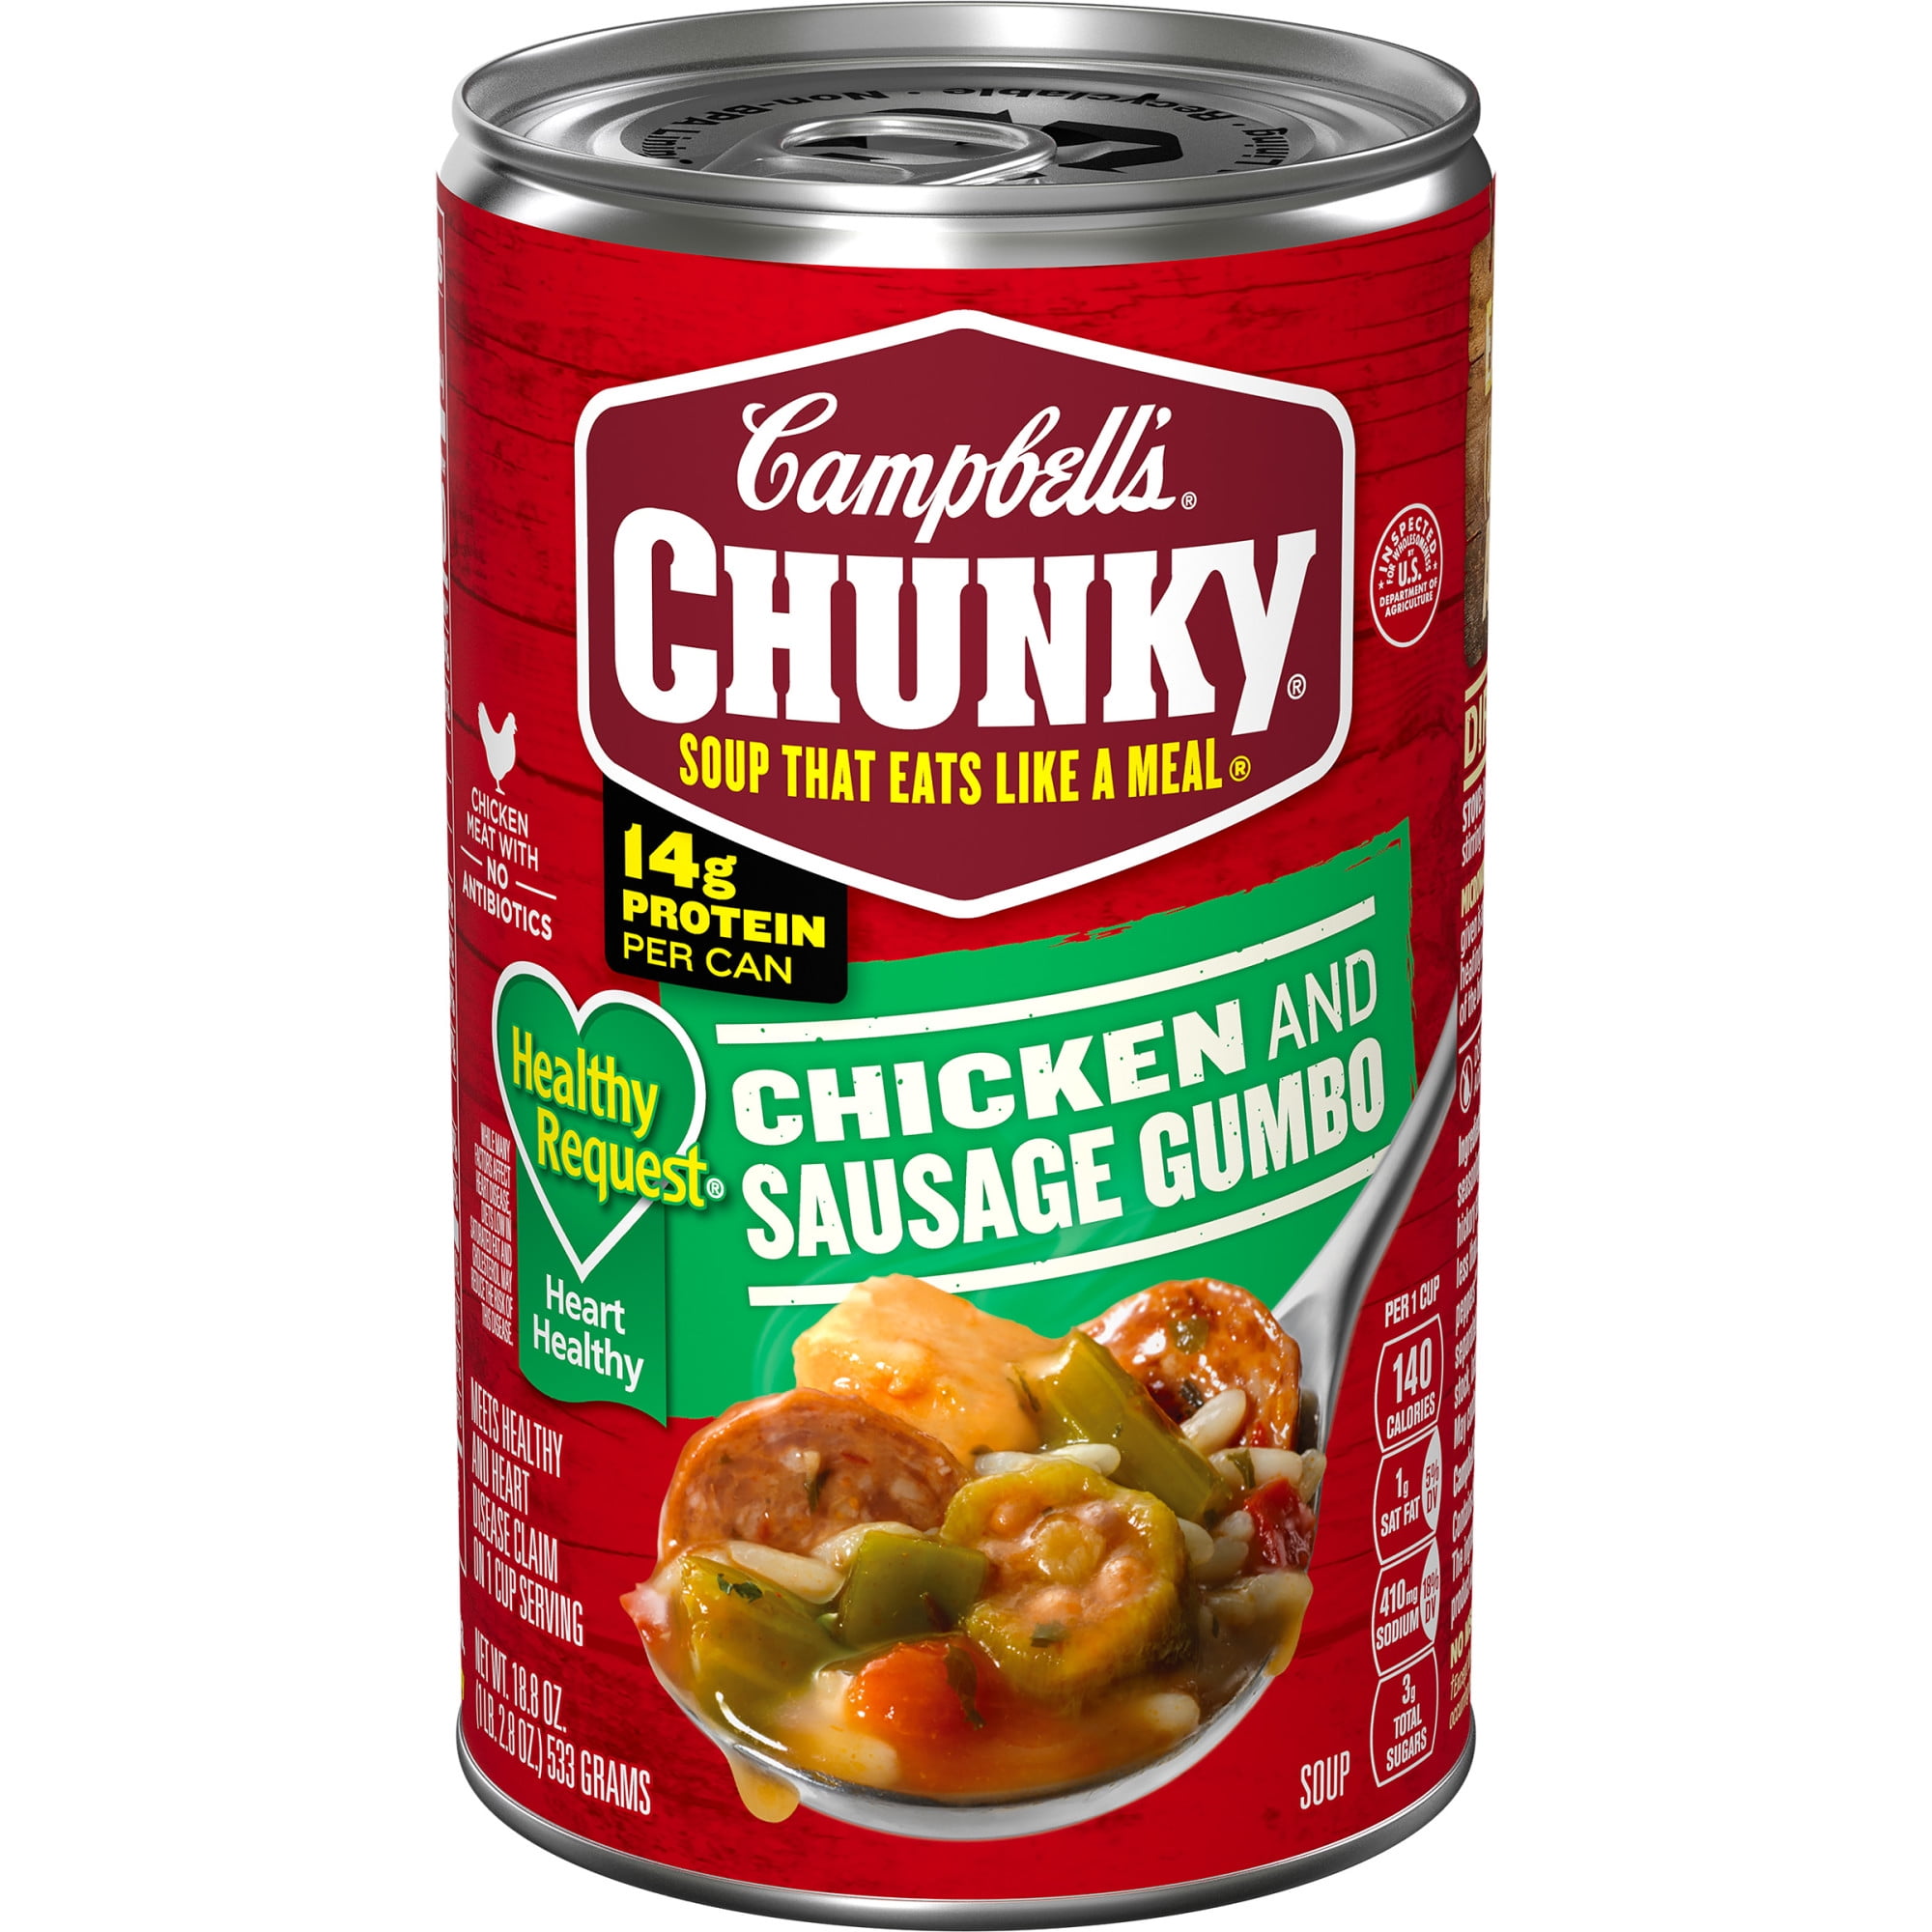 Campbell's Chunky Soup, Ready to Serve Healthy Request Chicken and Sausage Gumbo, 18.8 Oz Can